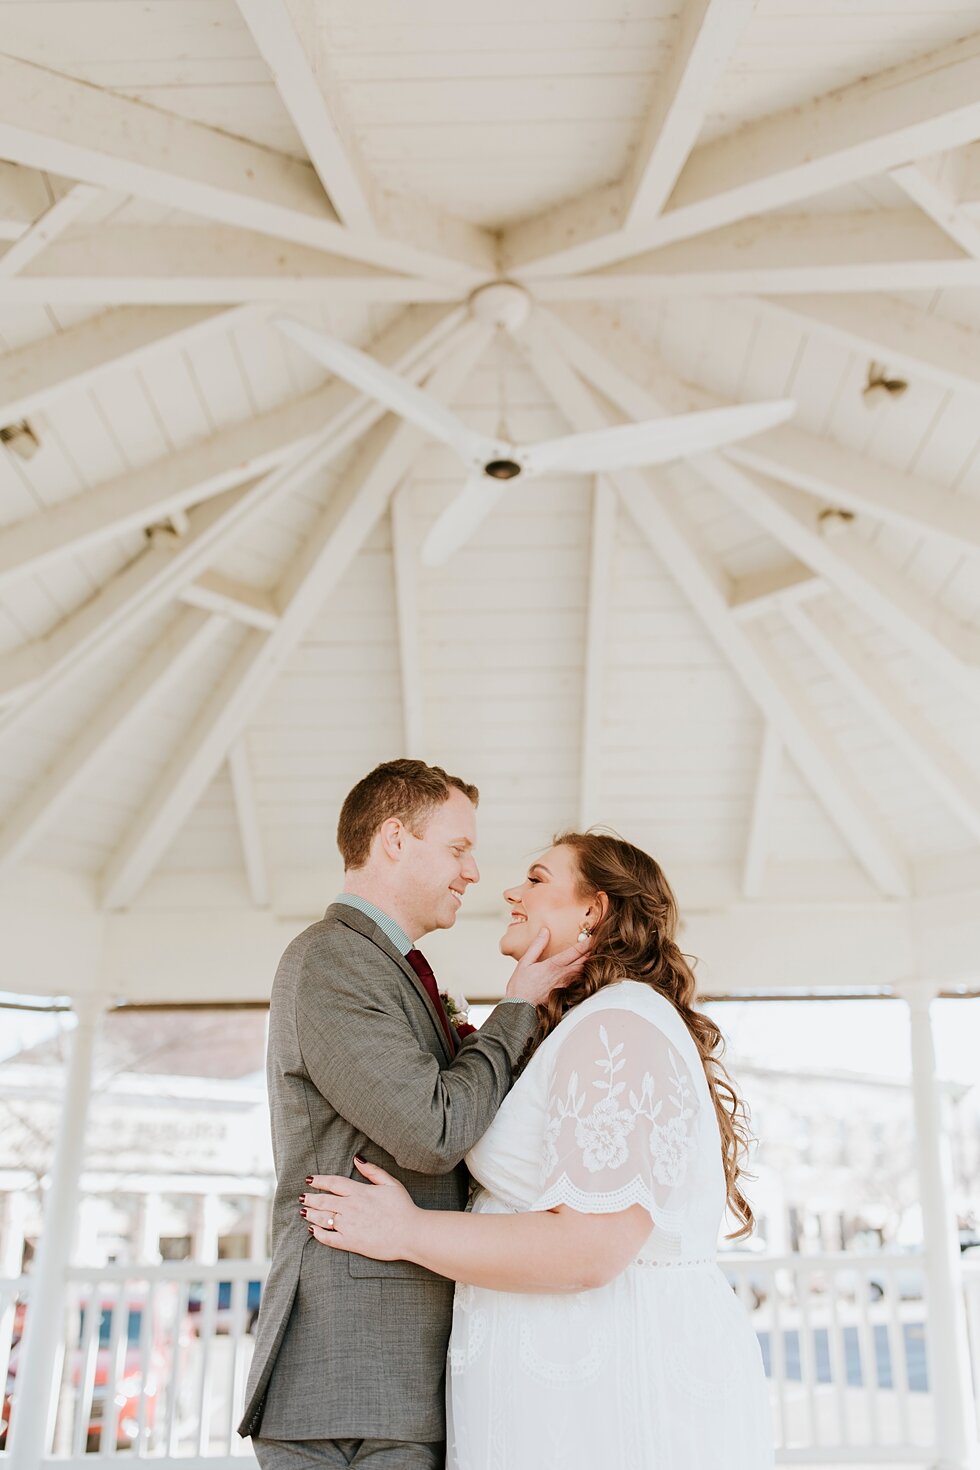  June bug community center where the bride and groom met for their pre ceremony photos with P&amp;DBL. Southern wedding Indiana intimate wedding small ceremony microceremony corydon indiana professional photographer #winterwedding #backyardwedding #c